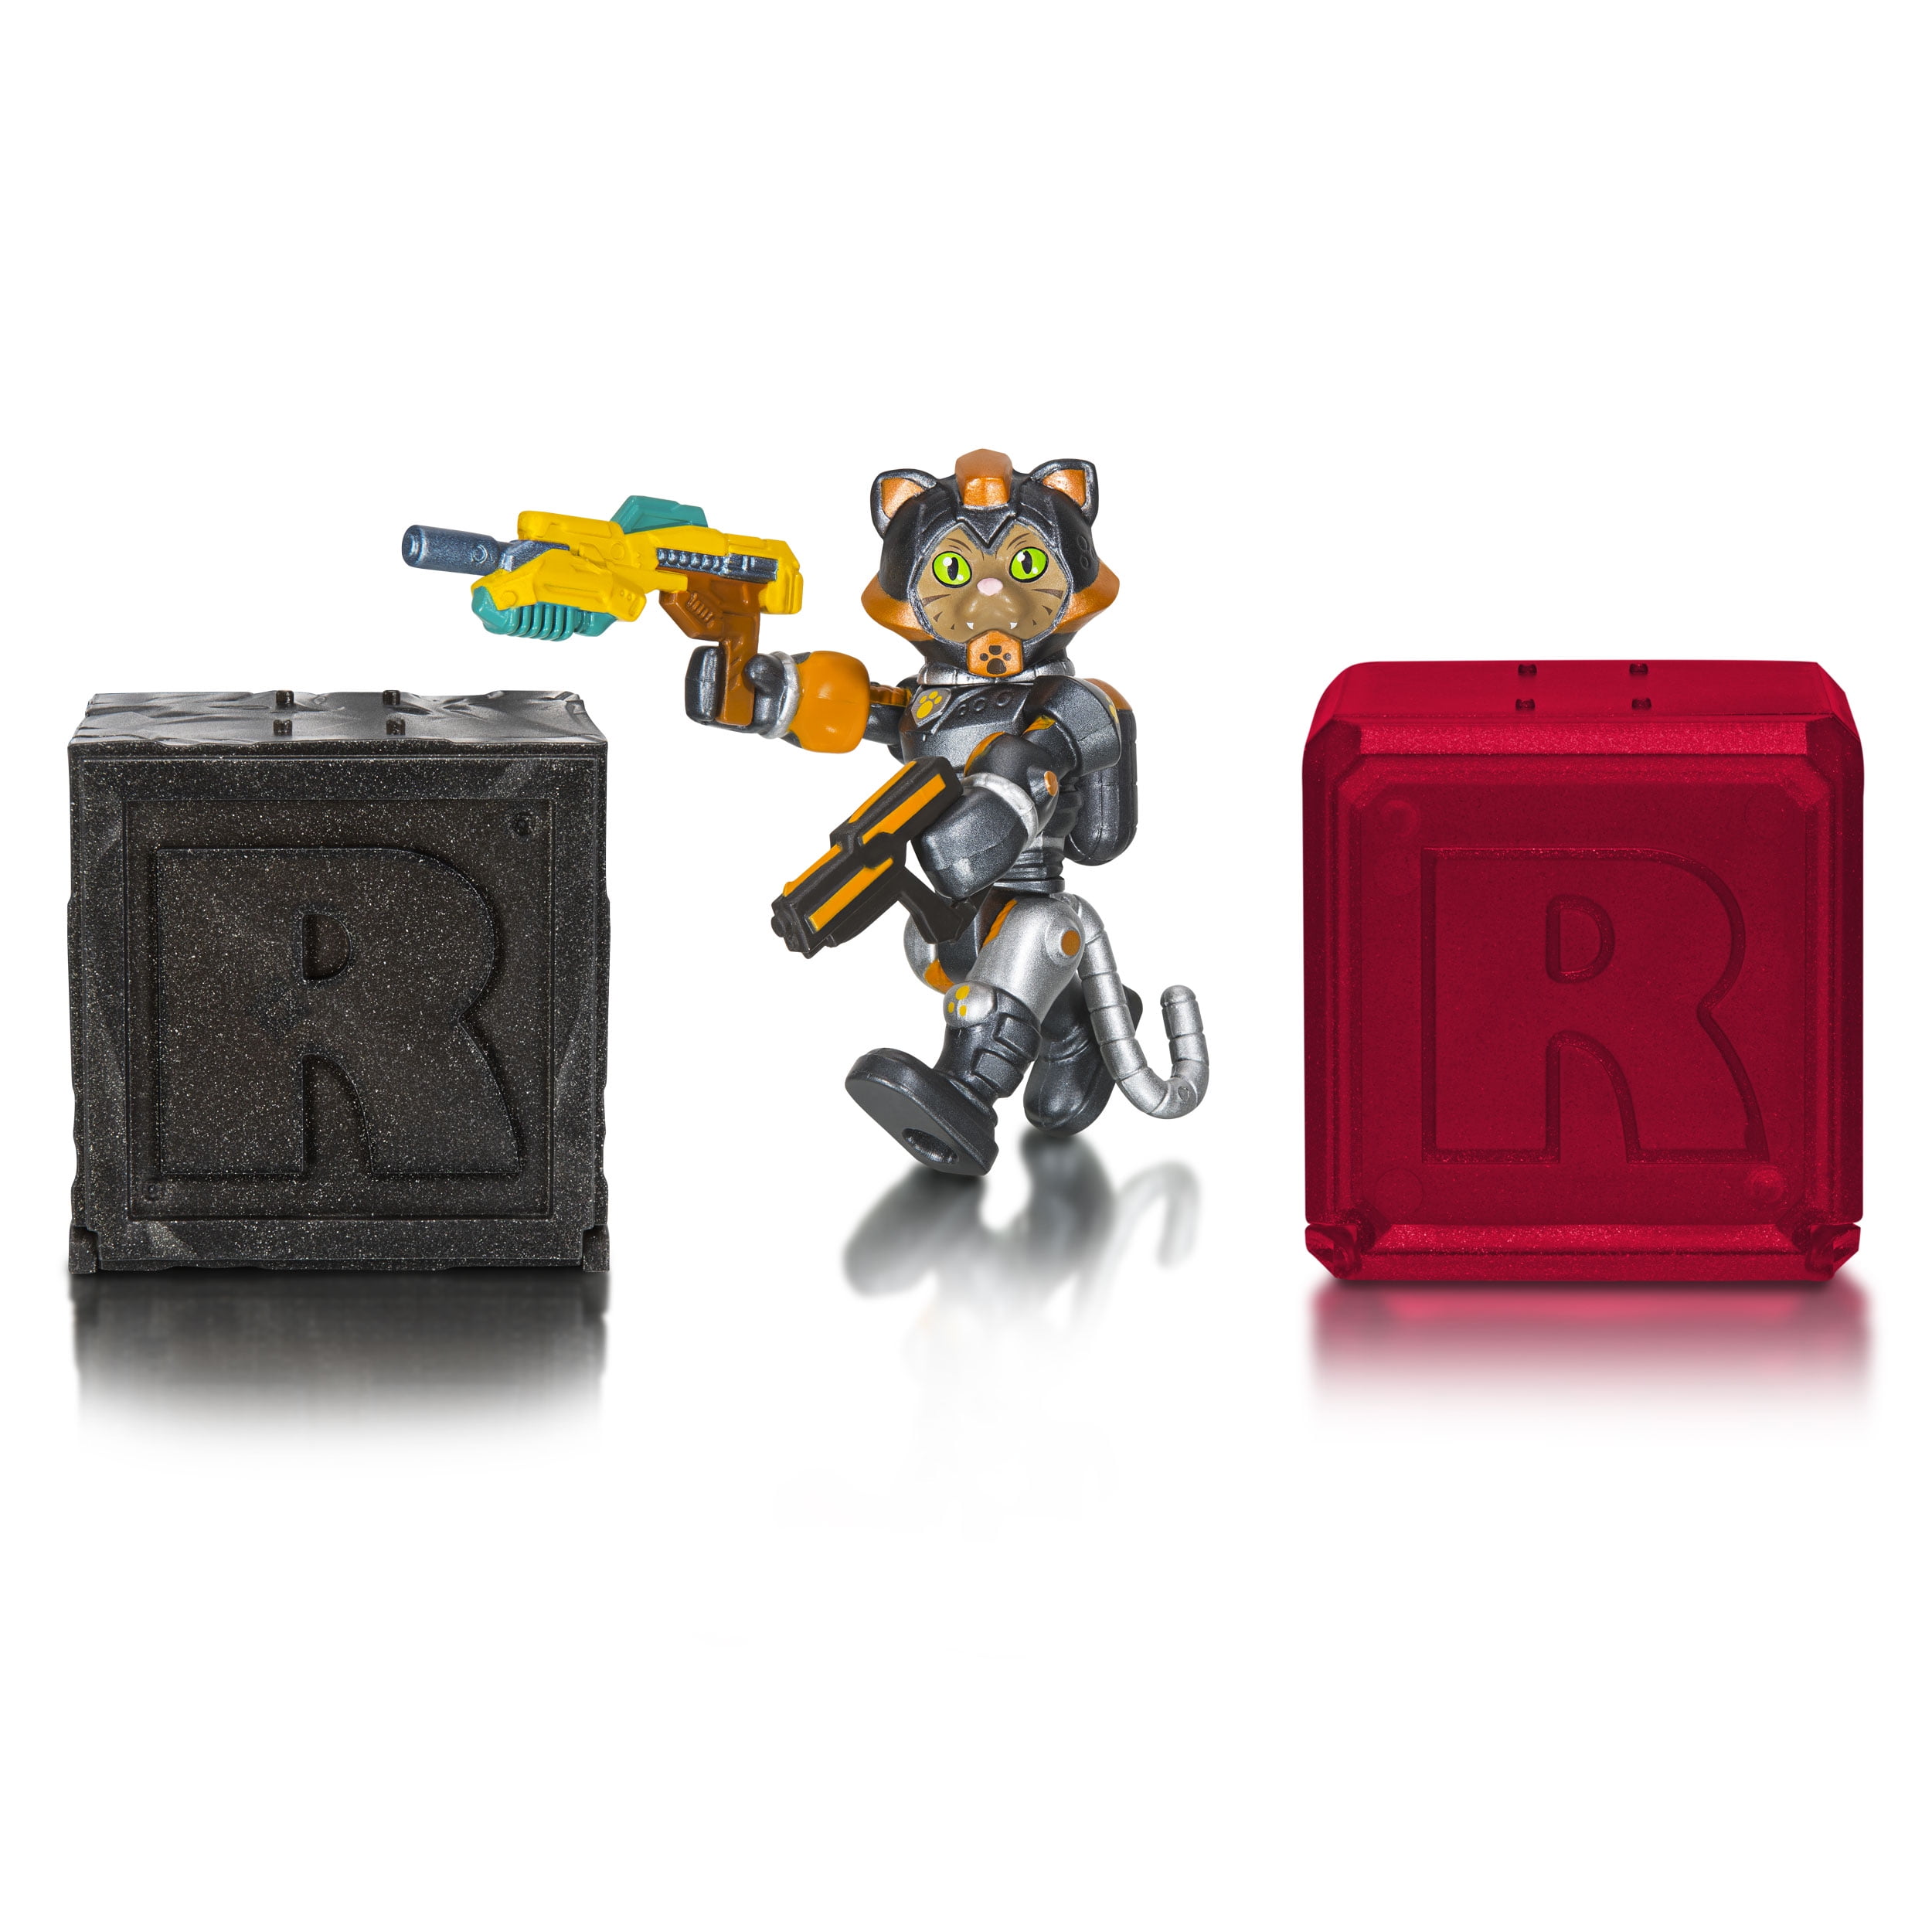 Roblox Toy, Roblox Figure Pack, Video Games, Roblox Celebrity